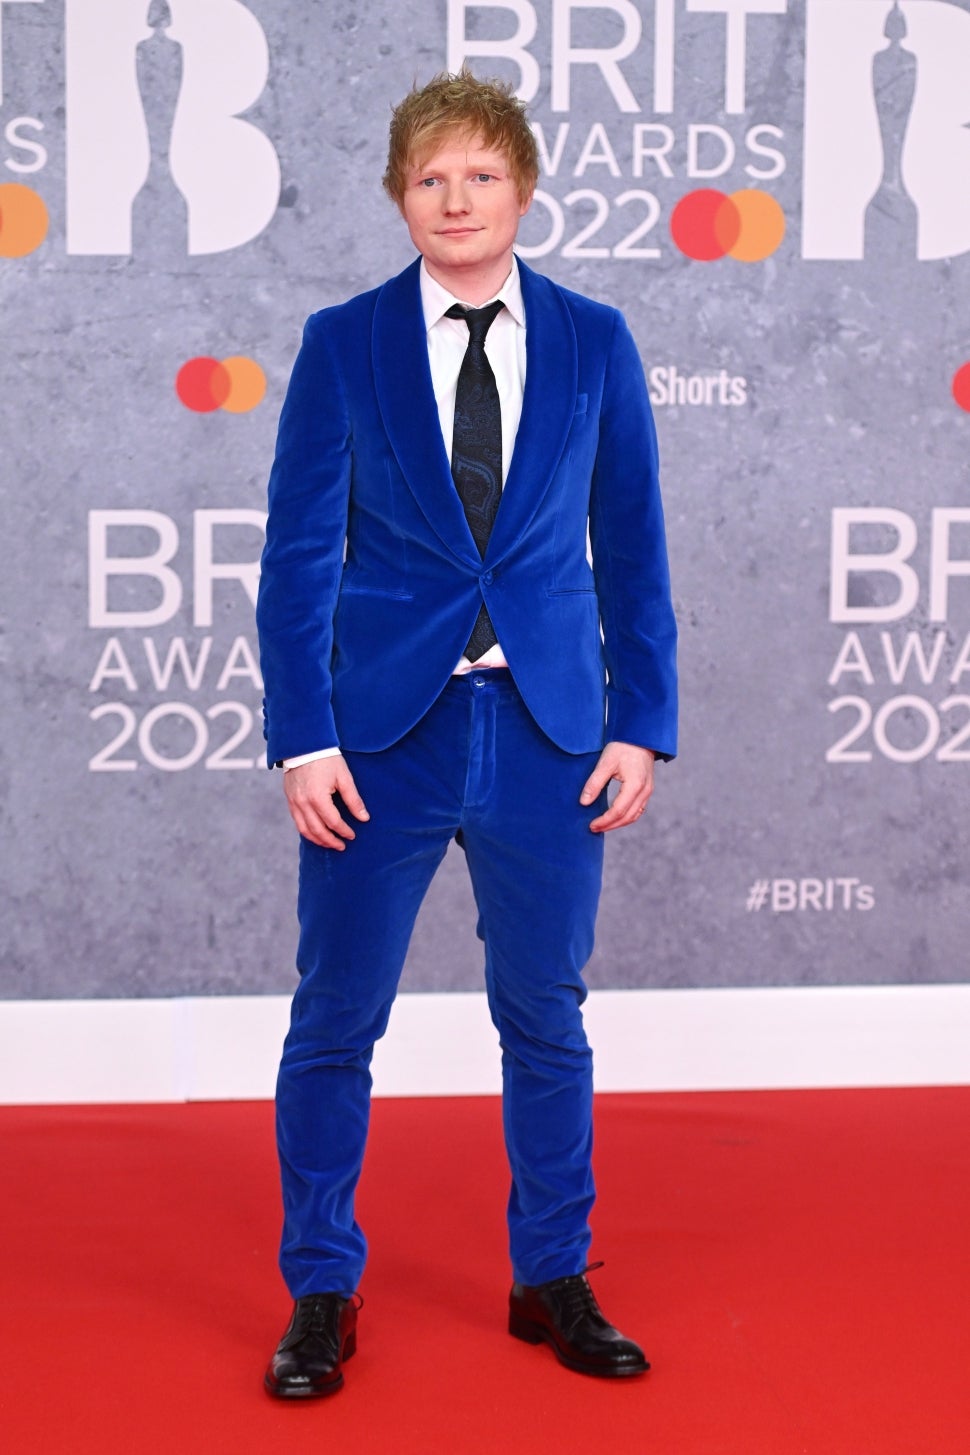 Ed Sheeran attends The BRIT Awards 2022 at The O2 Arena on February 08, 2022 in London, England. 